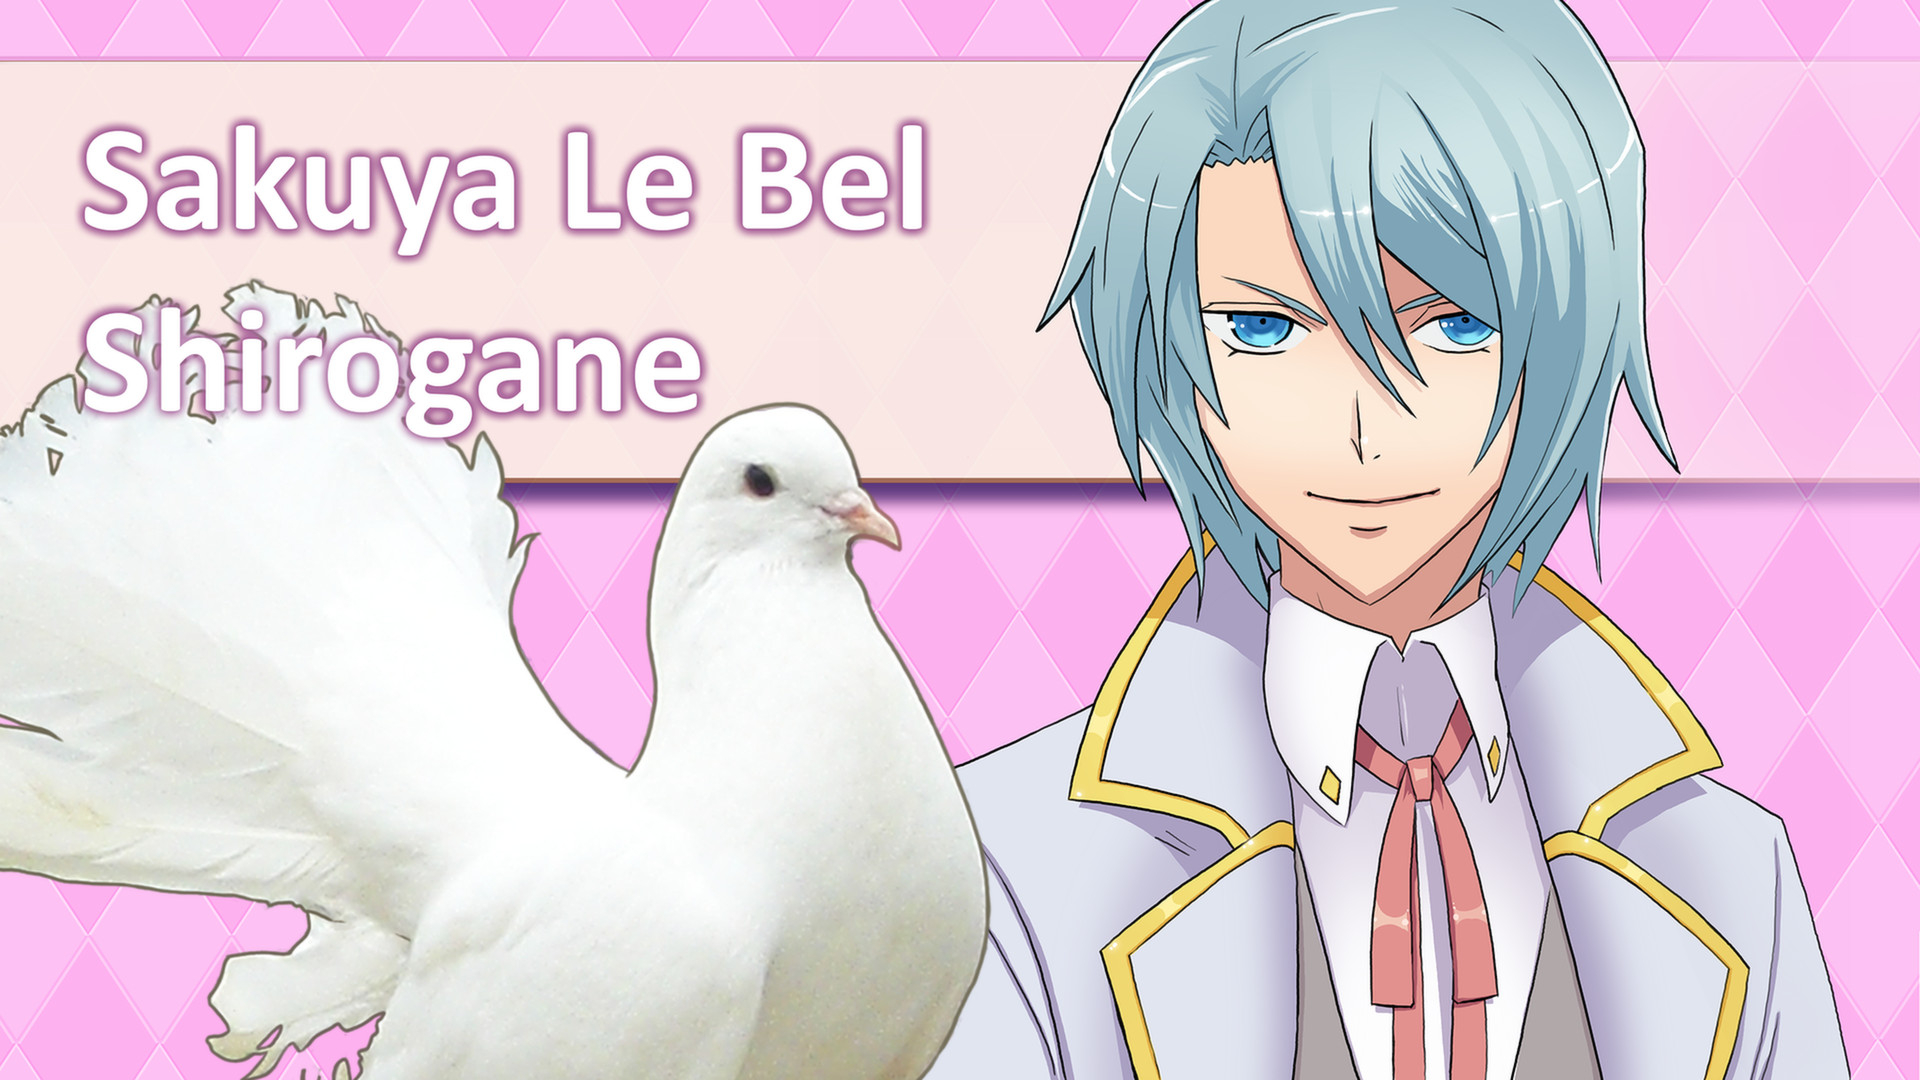 a dove posing on the left side and a beautiful blue haired man on the right side